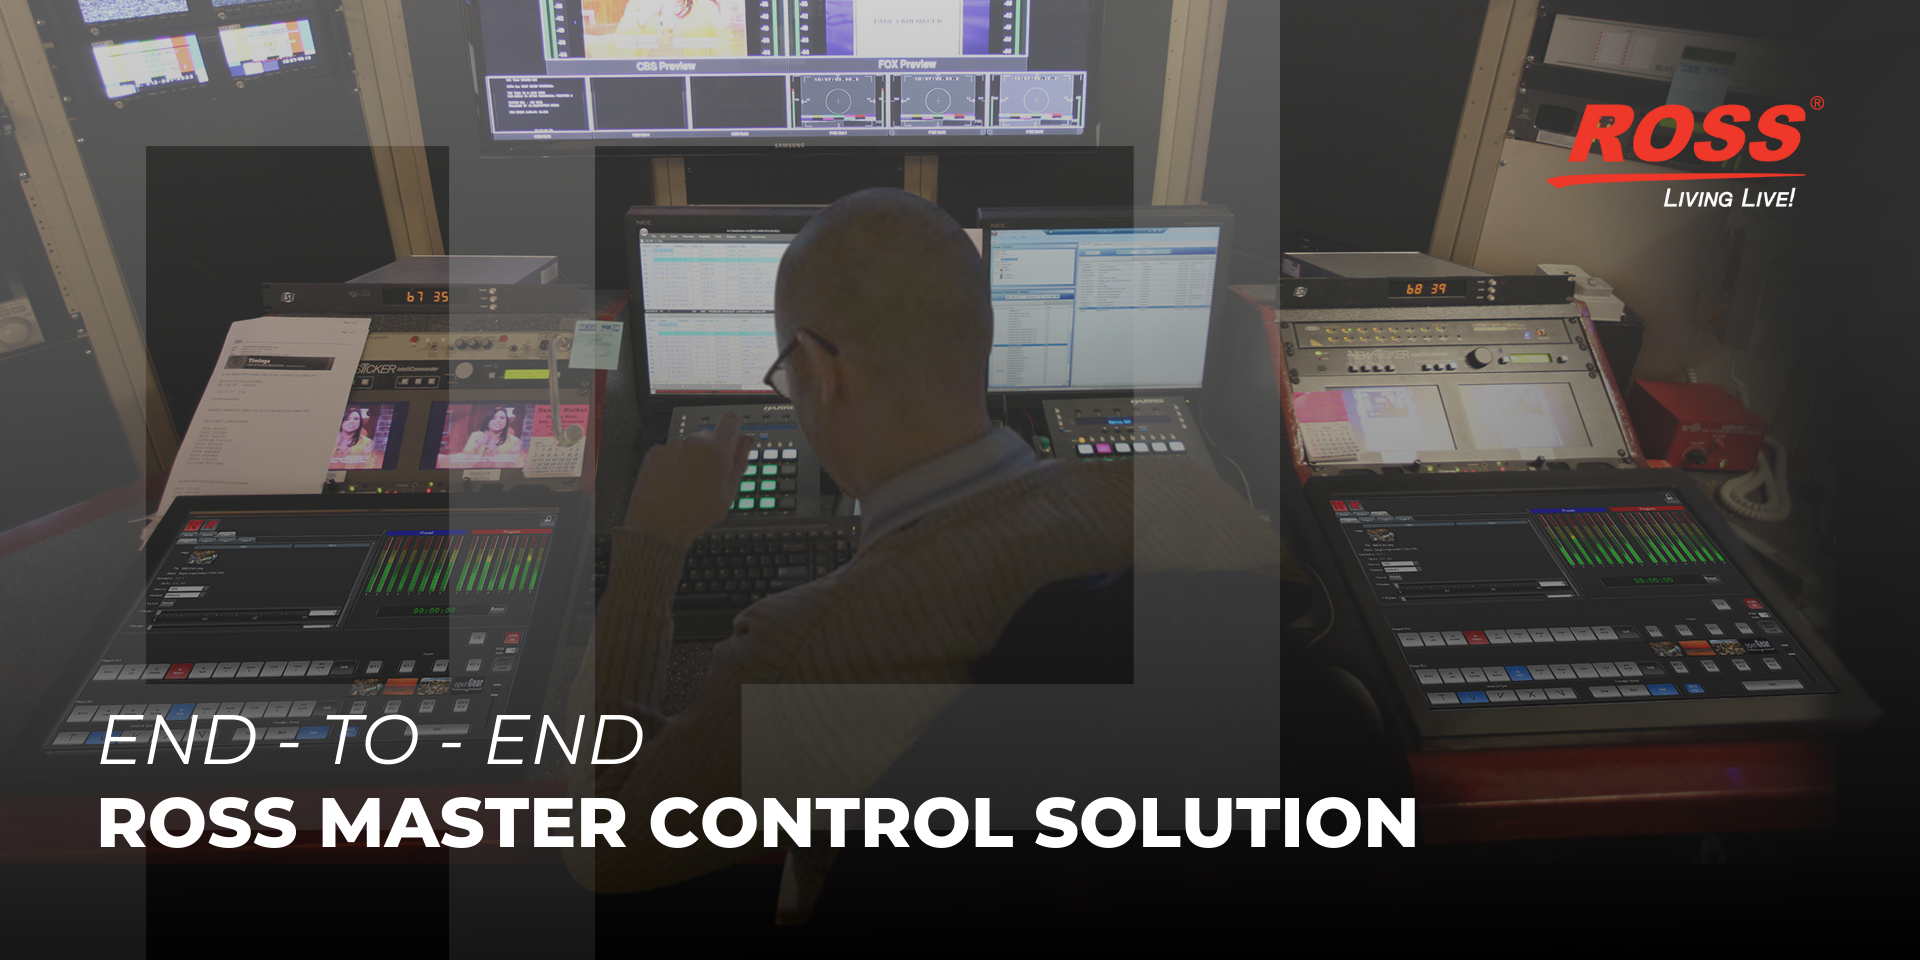 ROSS MASTER CONTROL SOLUTION